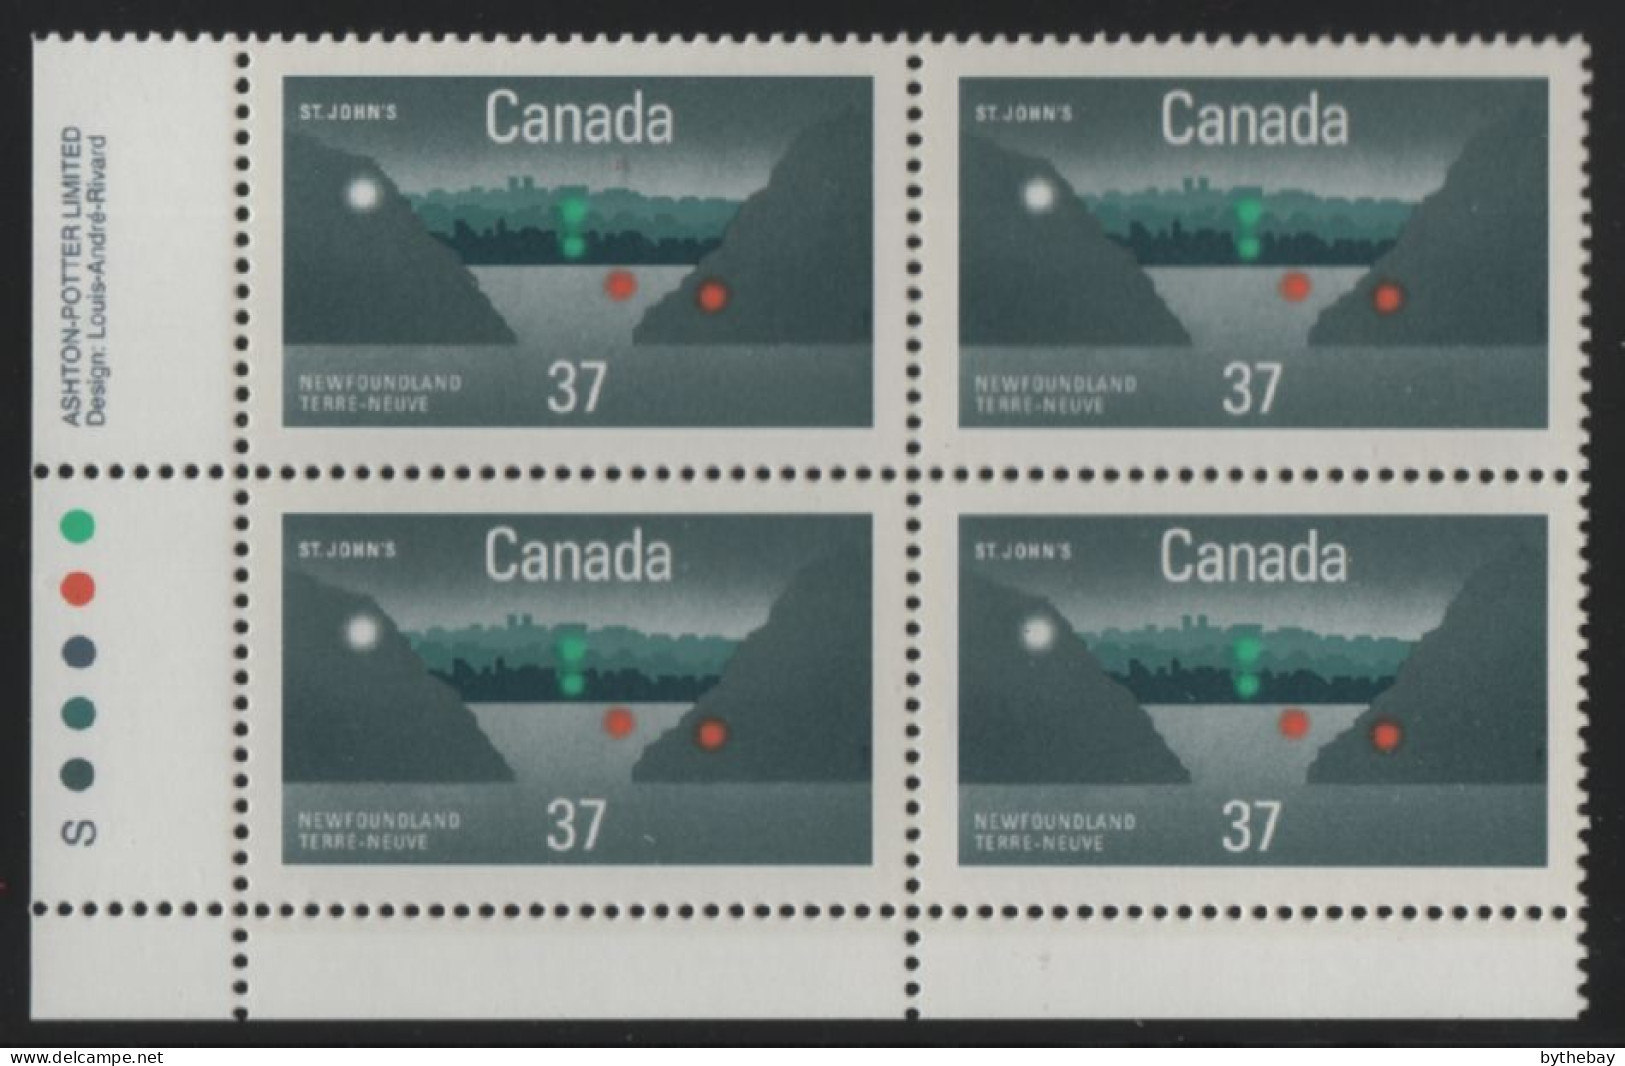 Canada 1988 MNH Sc 1214 37c St. John's Harbour LL Plate Block - Plate Number & Inscriptions